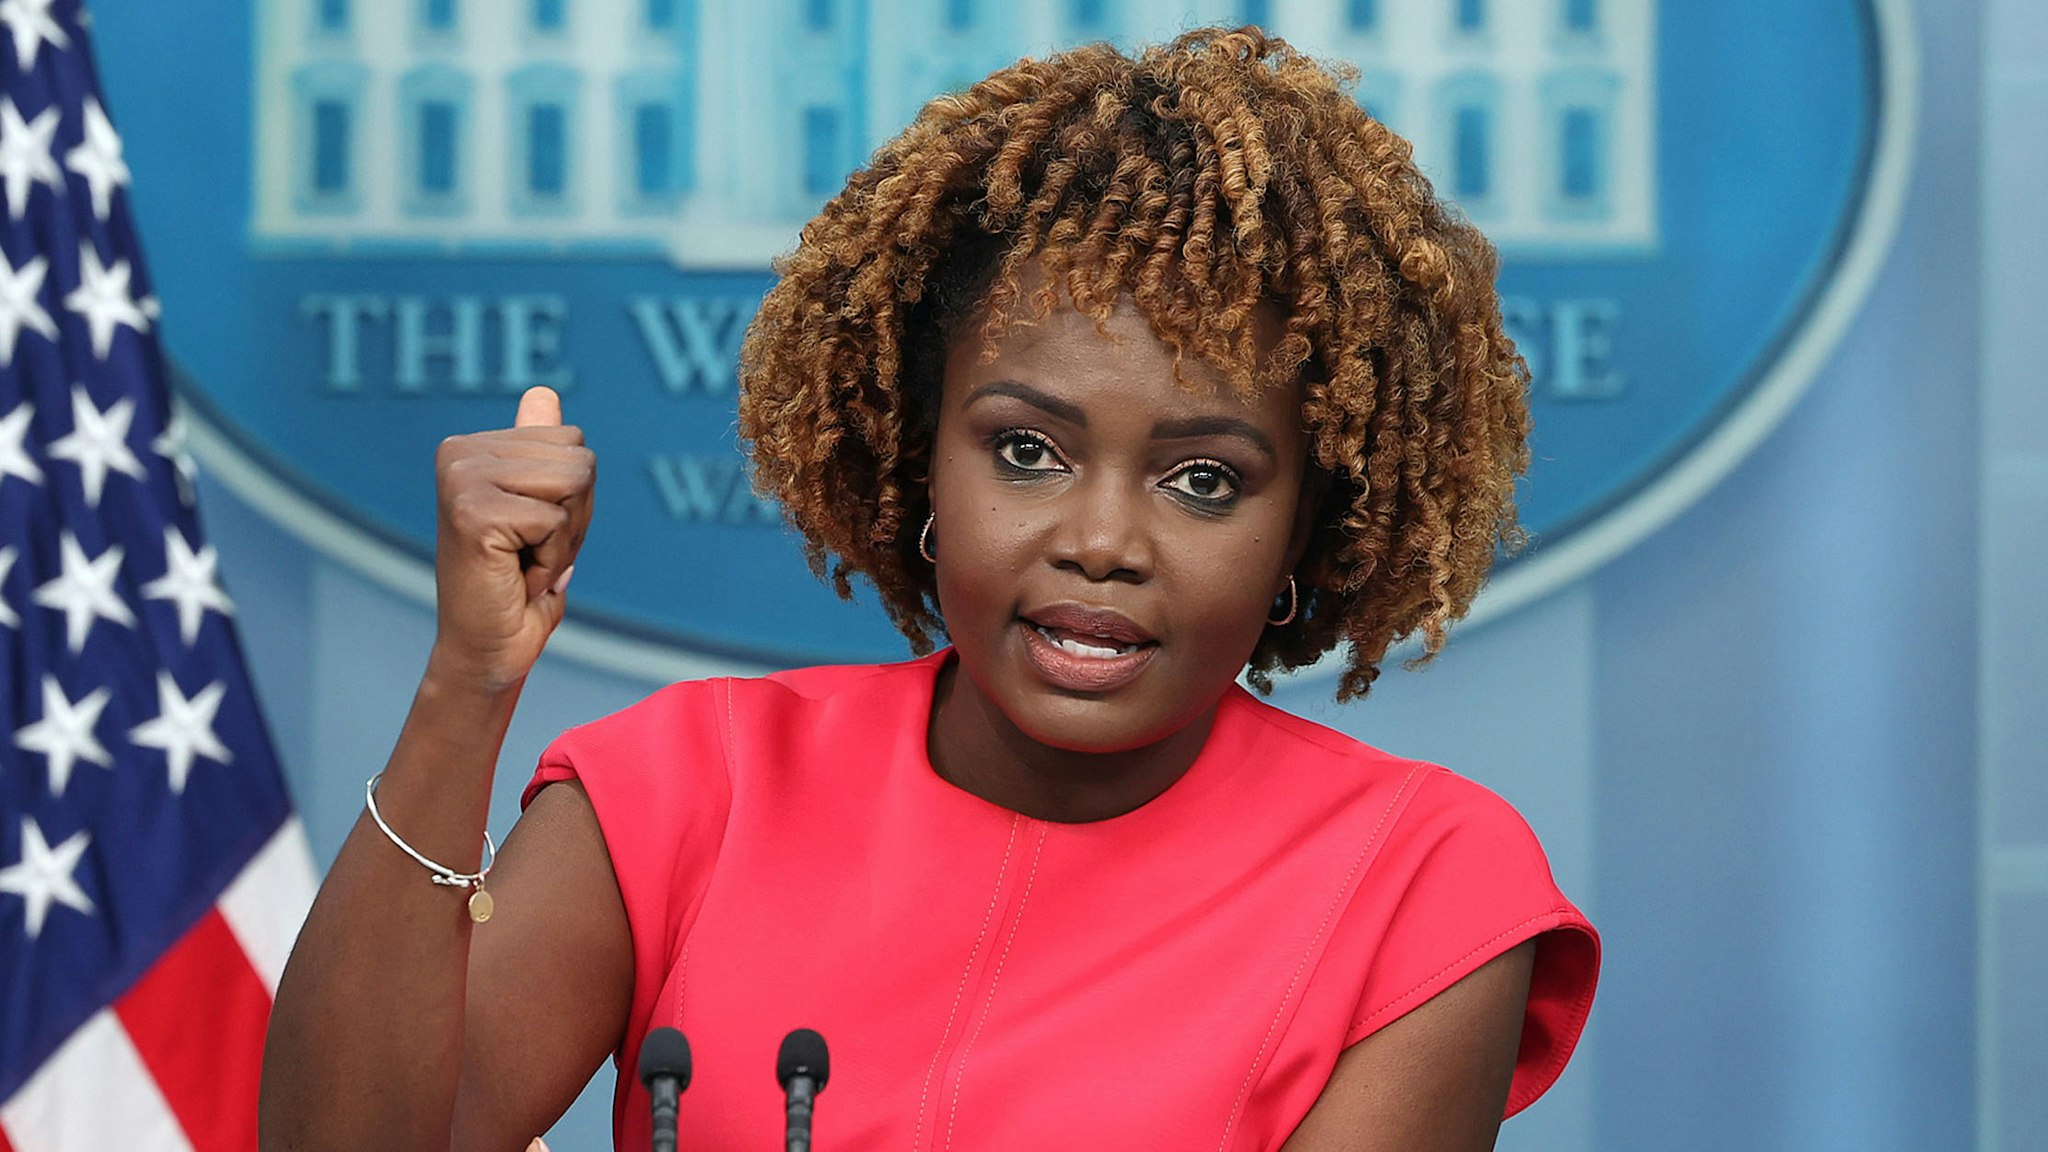 WASHINGTON, DC - OCTOBER 02: White House Press Secretary Karine Jean-Pierre speaks at the daily press briefing at the White House on October 02, 2023 in Washington, DC. Jean-Pierre spoke on Ukraine military funding, the autoworker strike, and government funding.